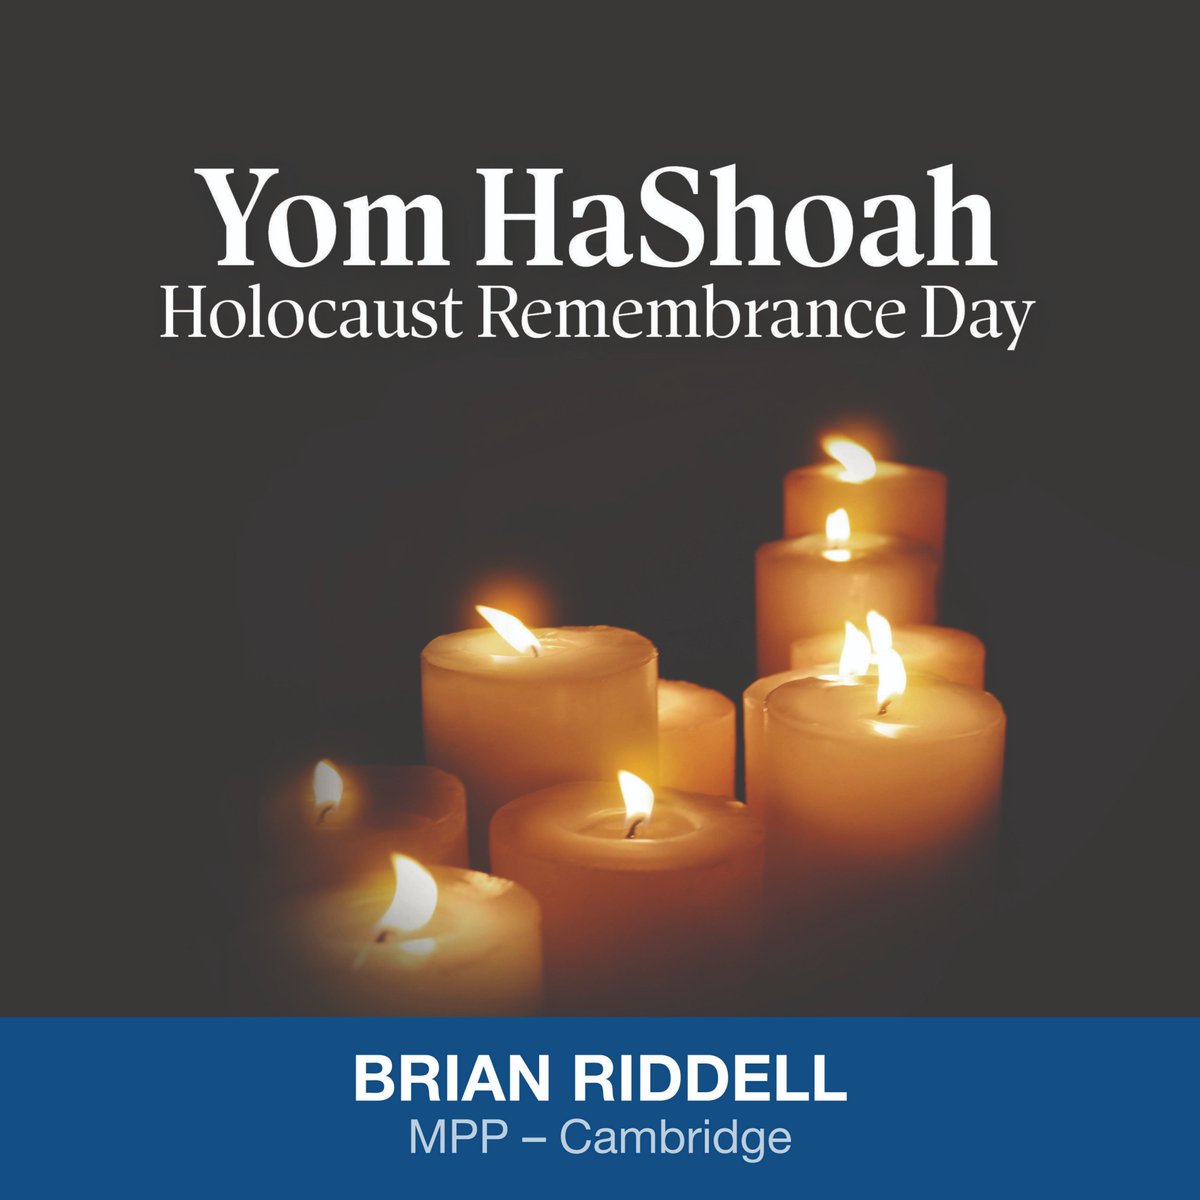 Today on #HolocaustRememberanceDay, we honour and memorialize the six million Jews and millions of other victims of the Holocaust. We must stand up against antisemitism, racism, and discrimination of any kind. #NeverAgain #YomHashoah